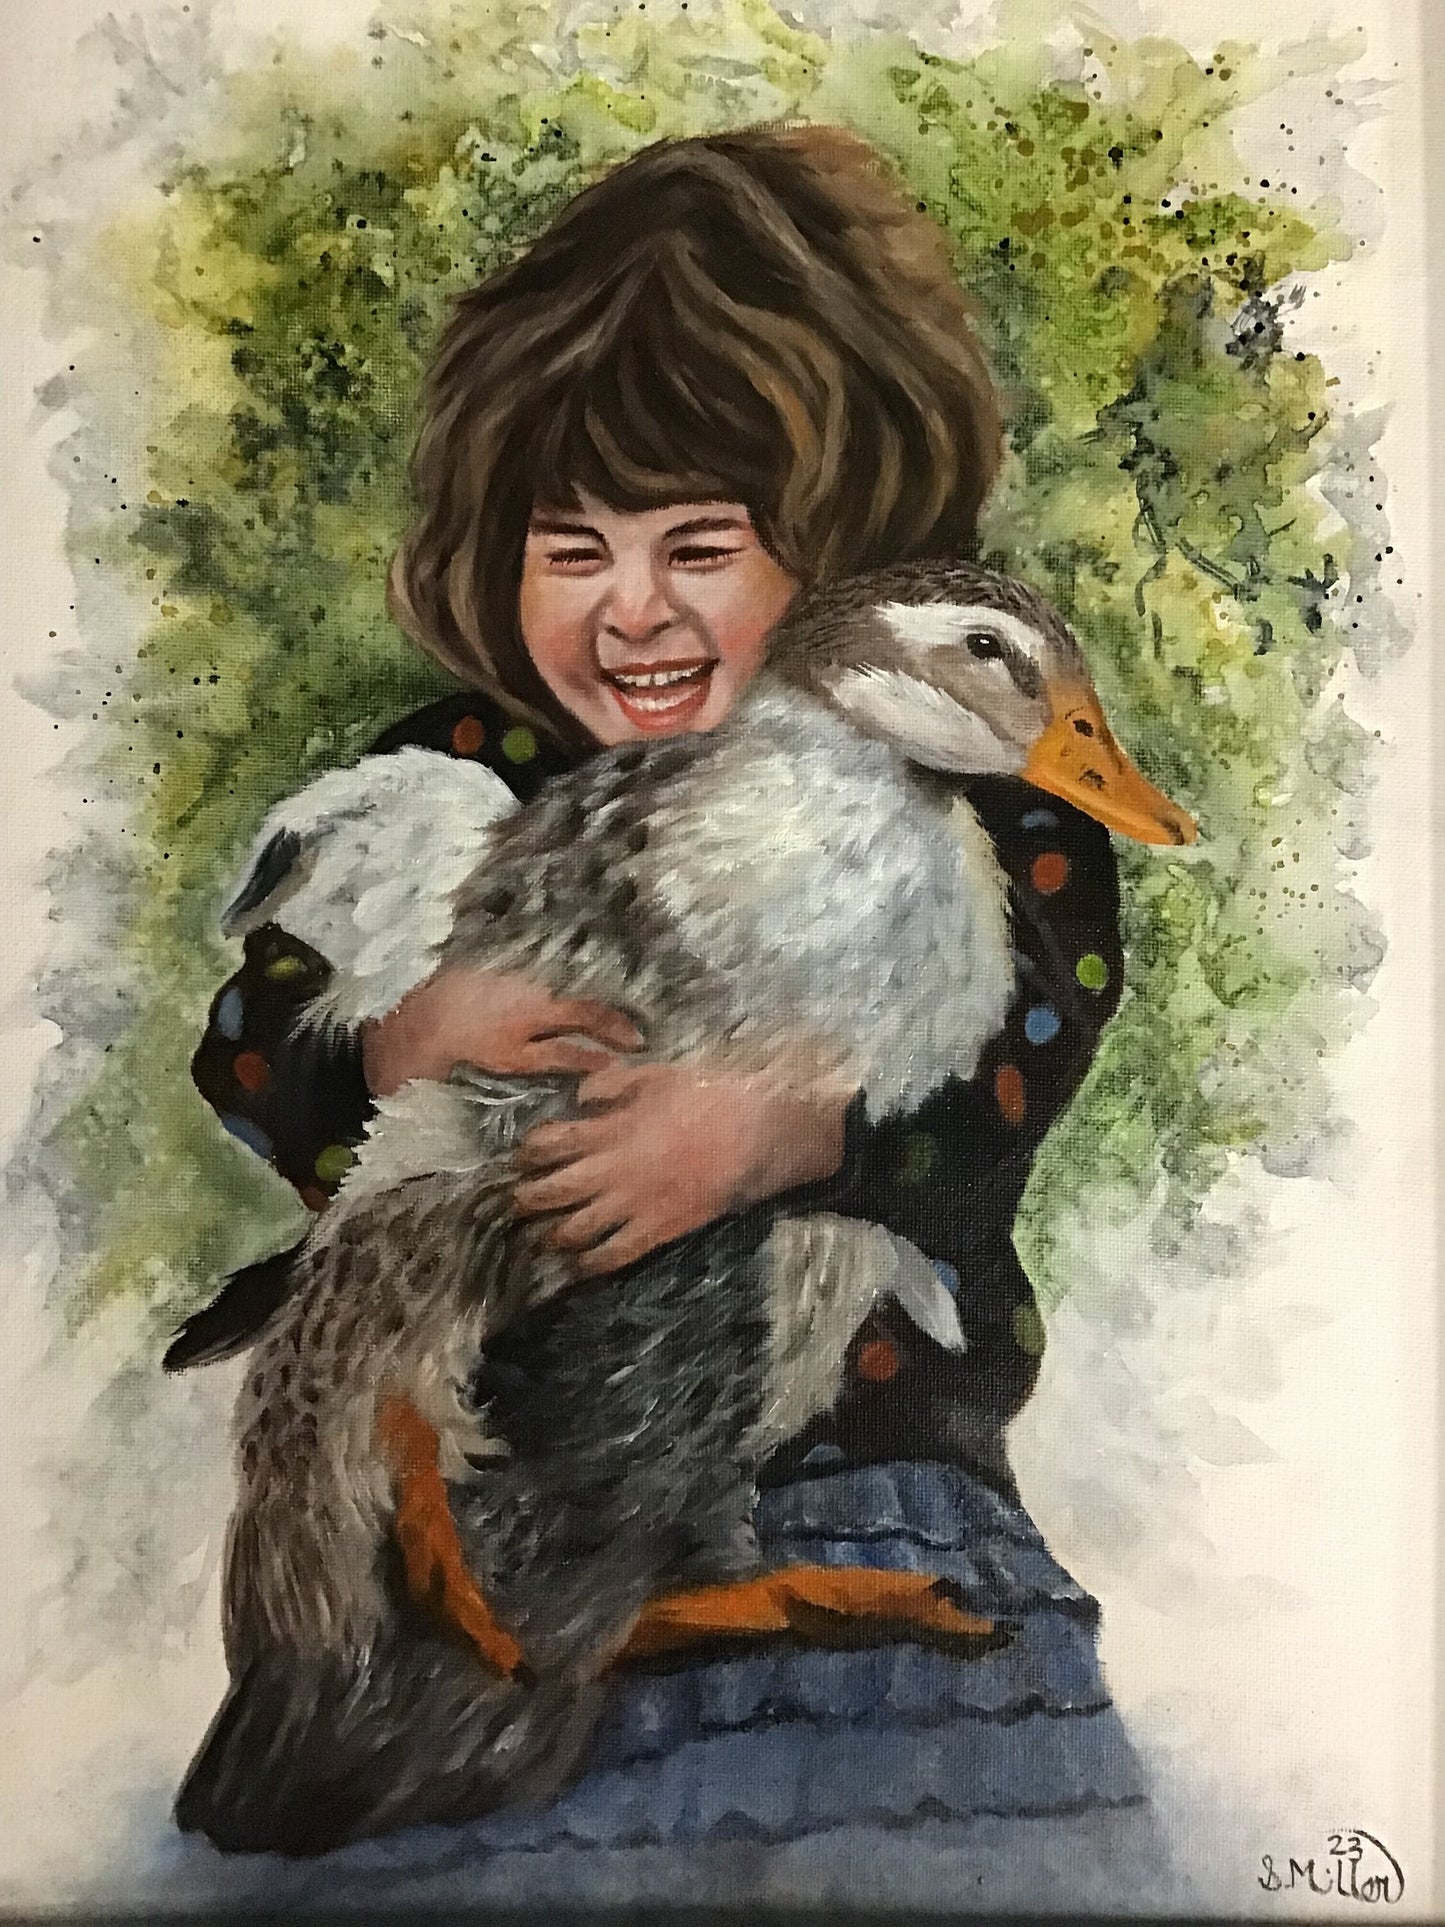 "Snuggle Duck" Original Painting, Oil over Watercolor